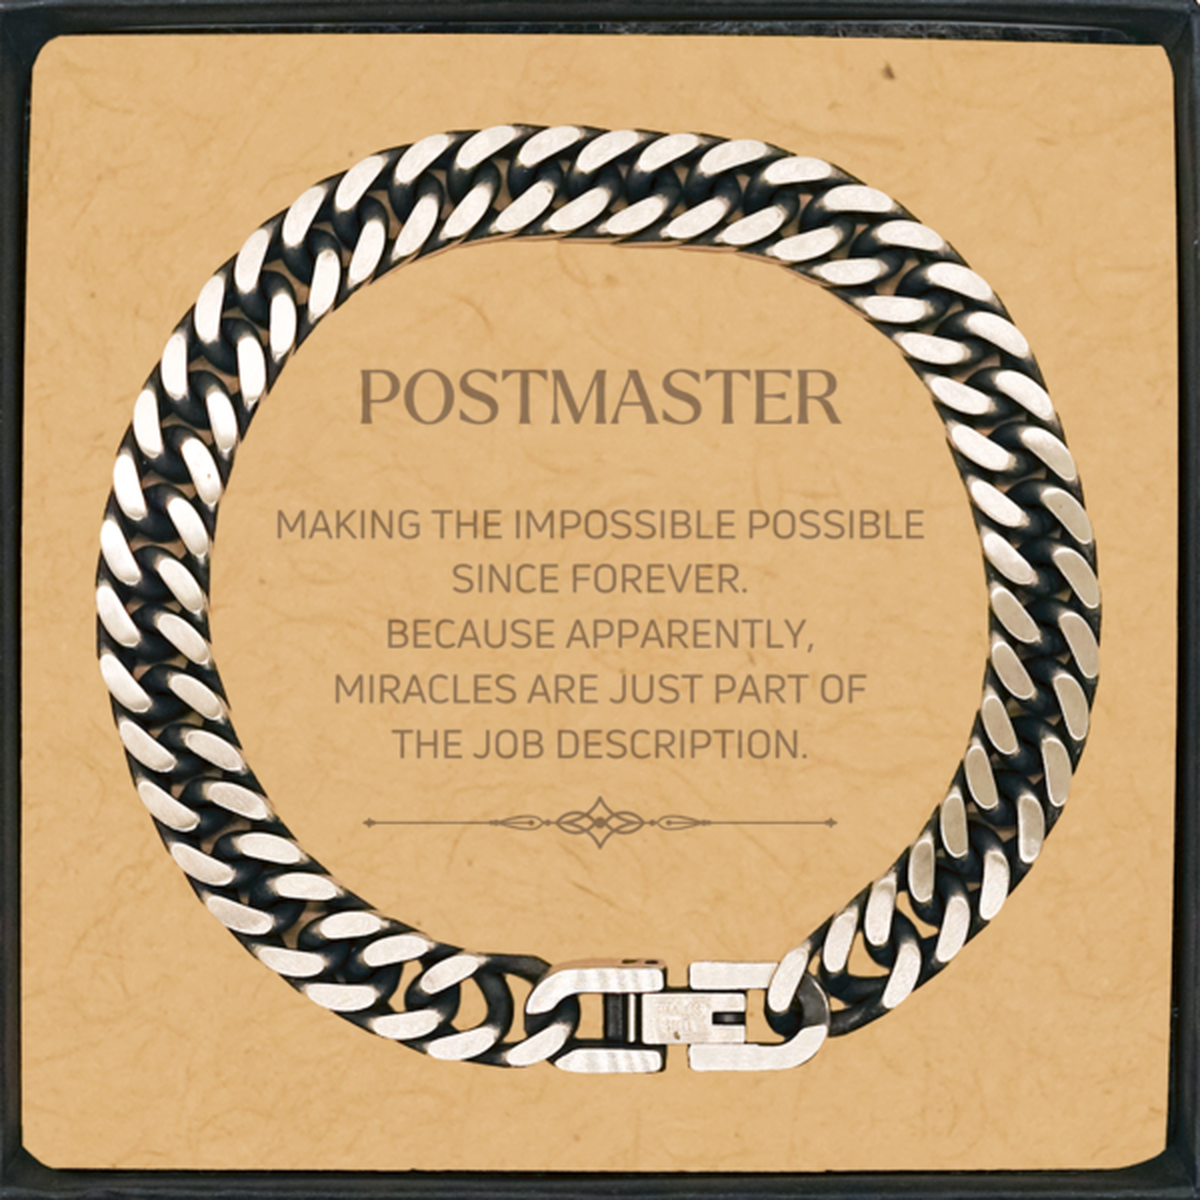 Funny Postmaster Gifts, Miracles are just part of the job description, Inspirational Birthday Cuban Link Chain Bracelet For Postmaster, Men, Women, Coworkers, Friends, Boss